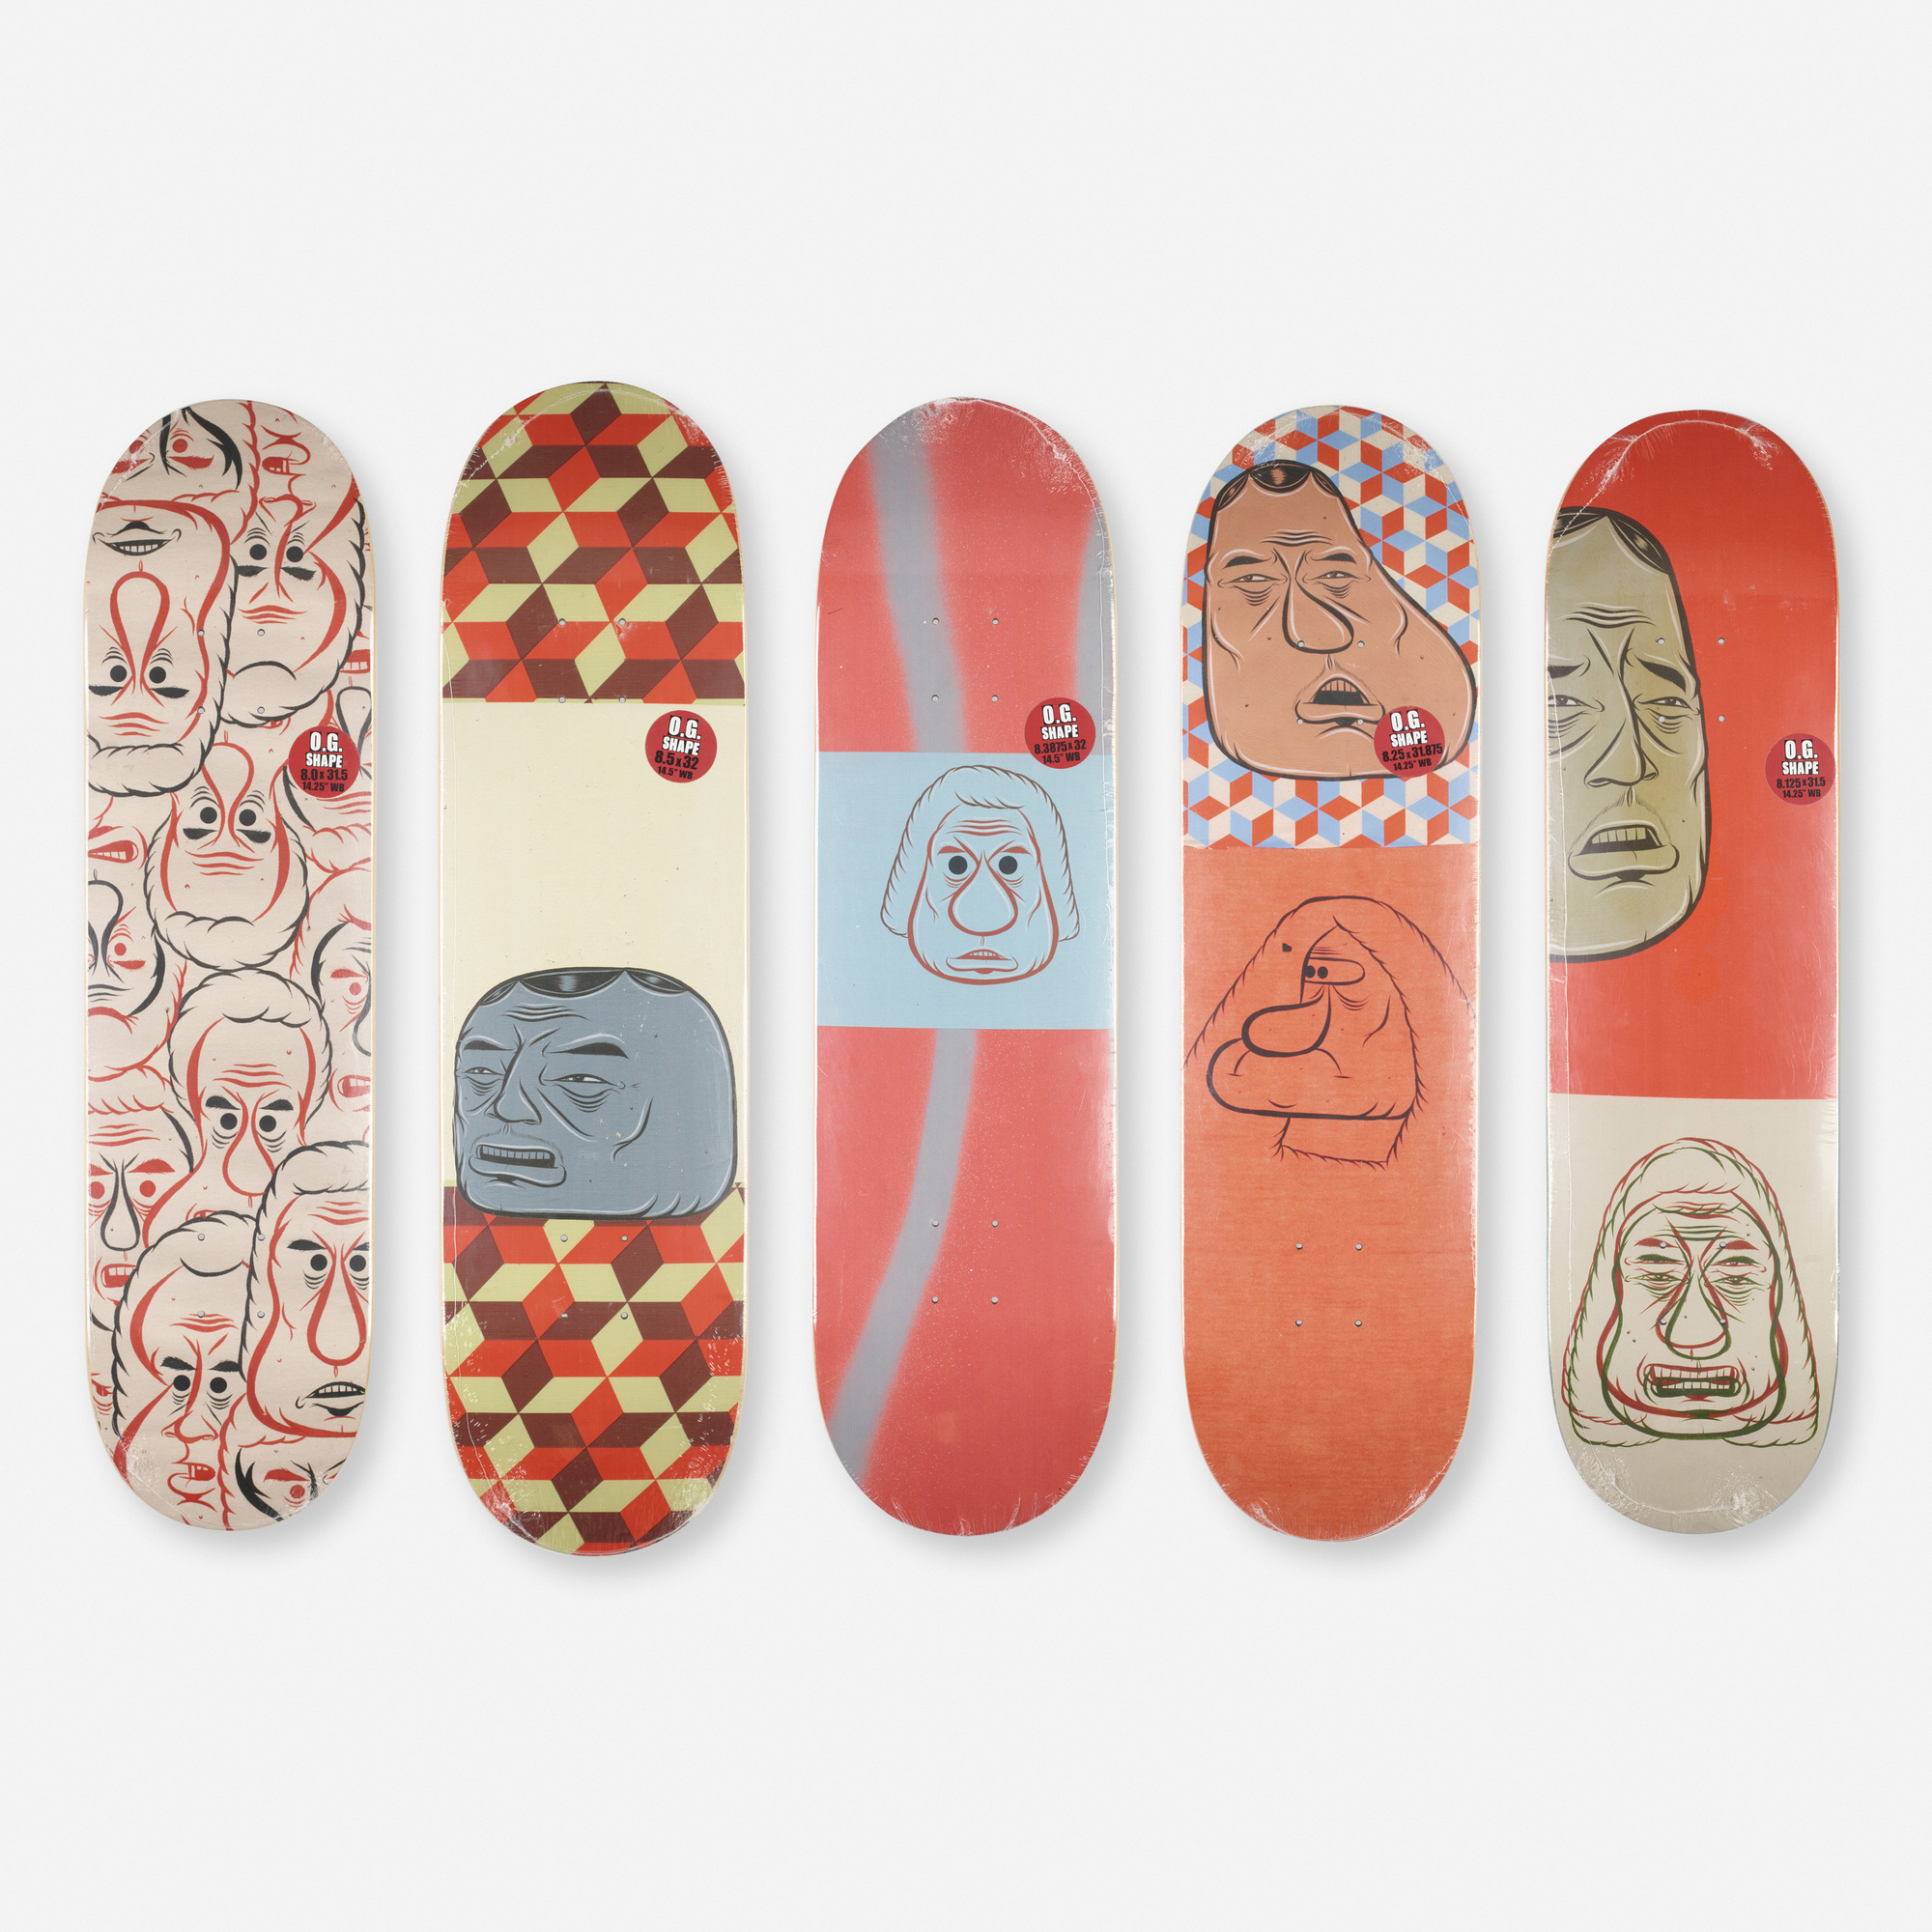 377: BARRY MCGEE, Collection of five skateboard decks (from the 